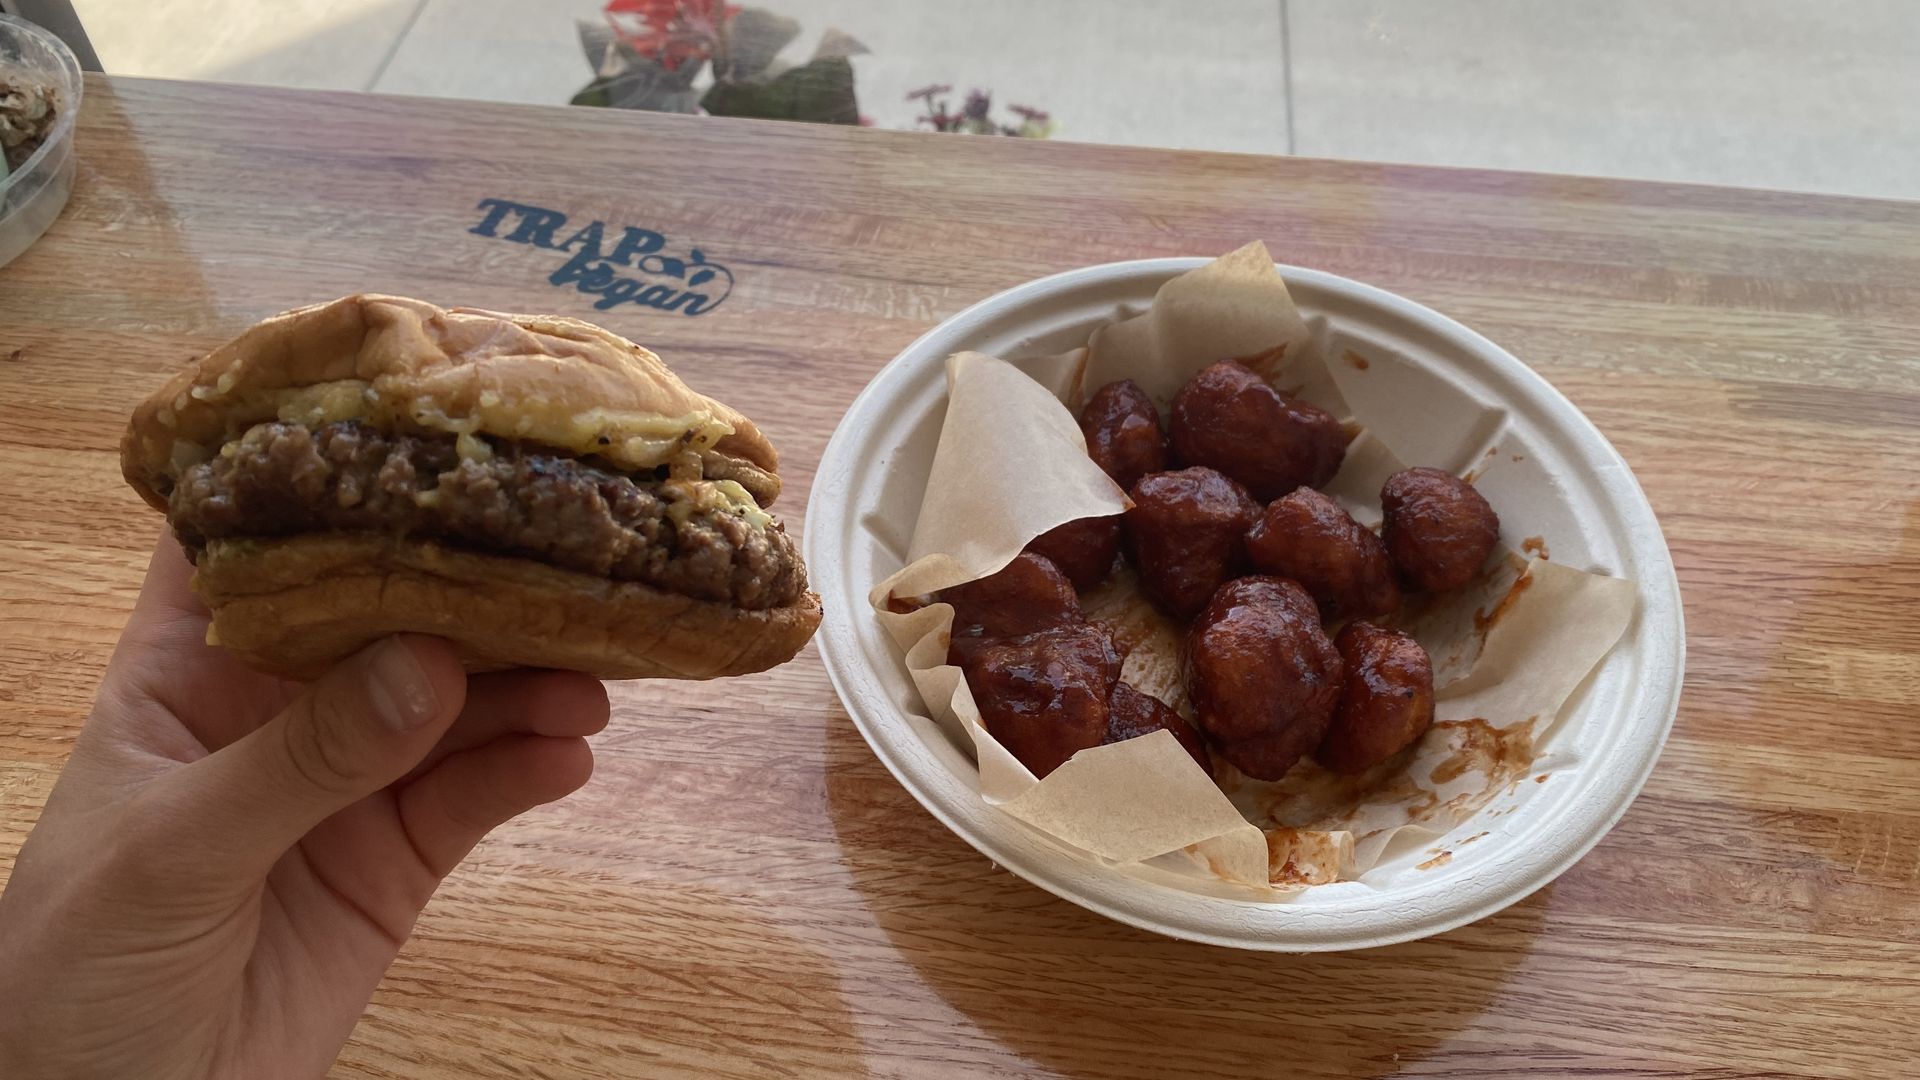 A burger, held in a hand, is shown next to a bowl of cauliflower wings on a table.